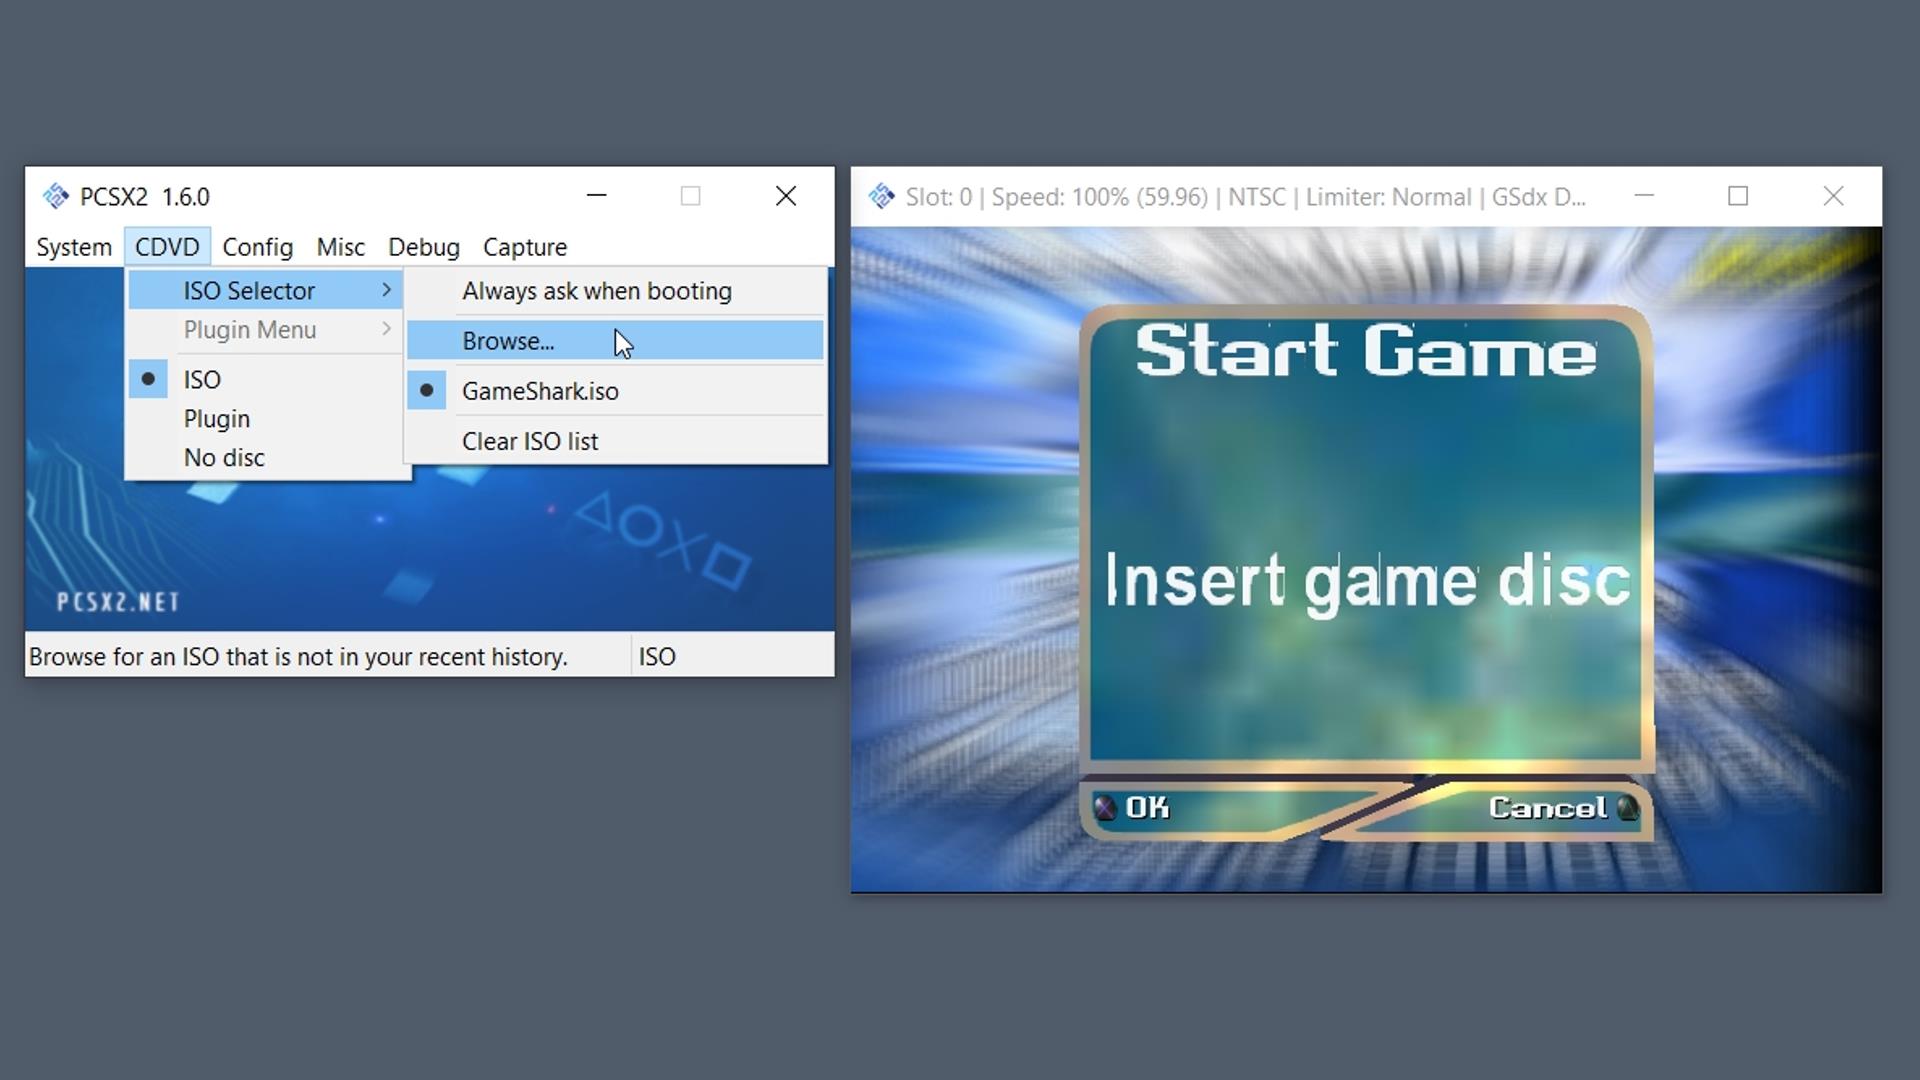 How To Use GameShark On PCSX2